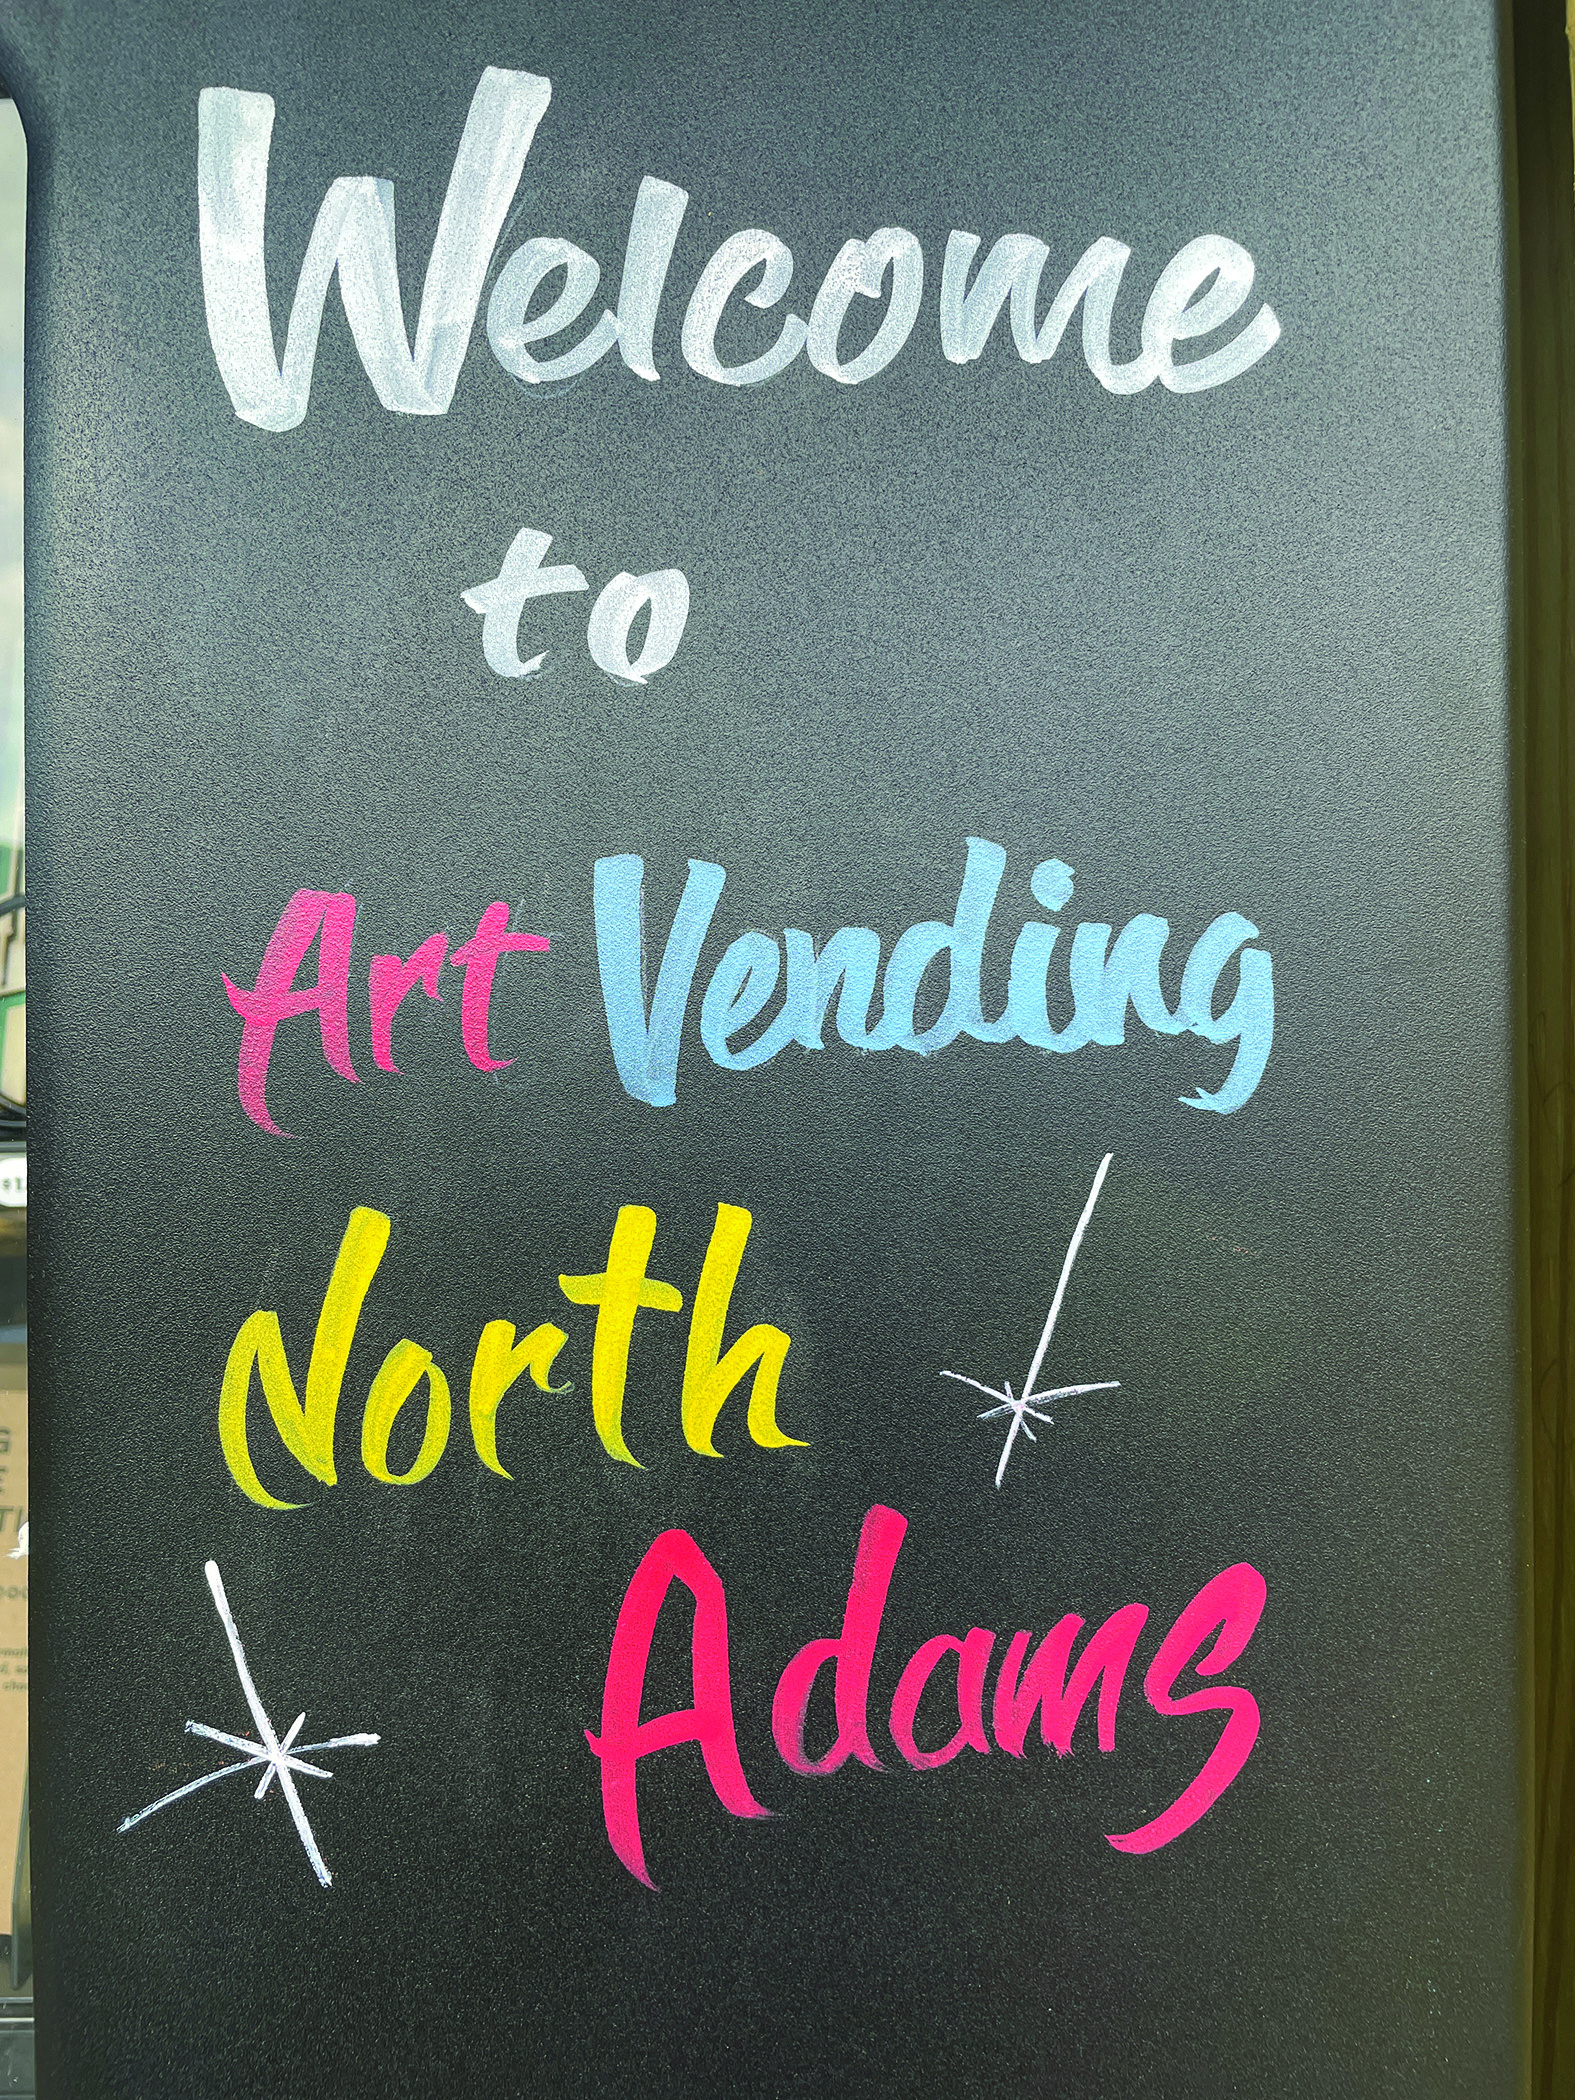 Artist Aaron Oster painted the front of Art Vending North Adams in his signature traditional sign painting technique.